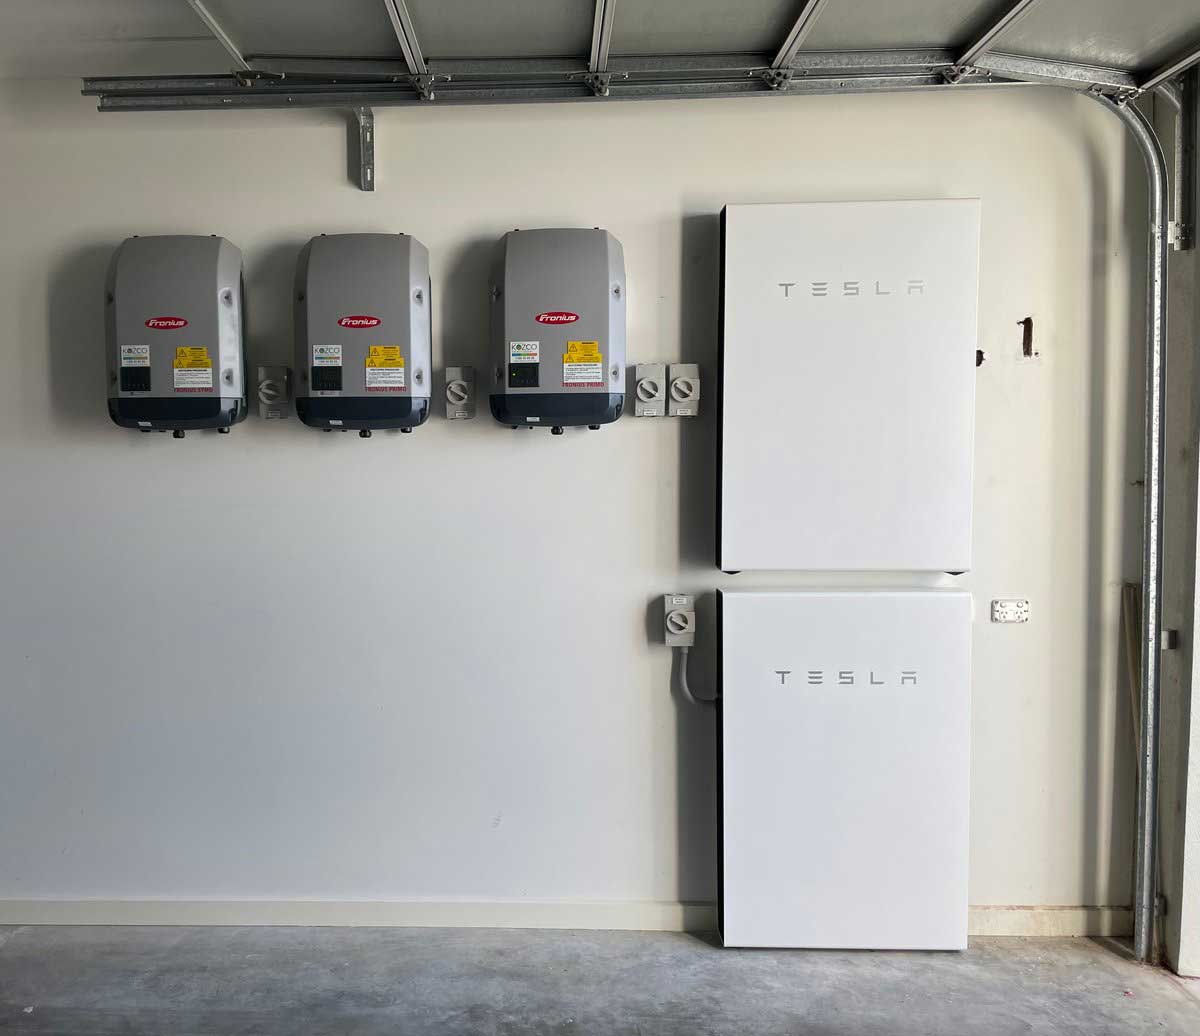 A double Powerwall installation